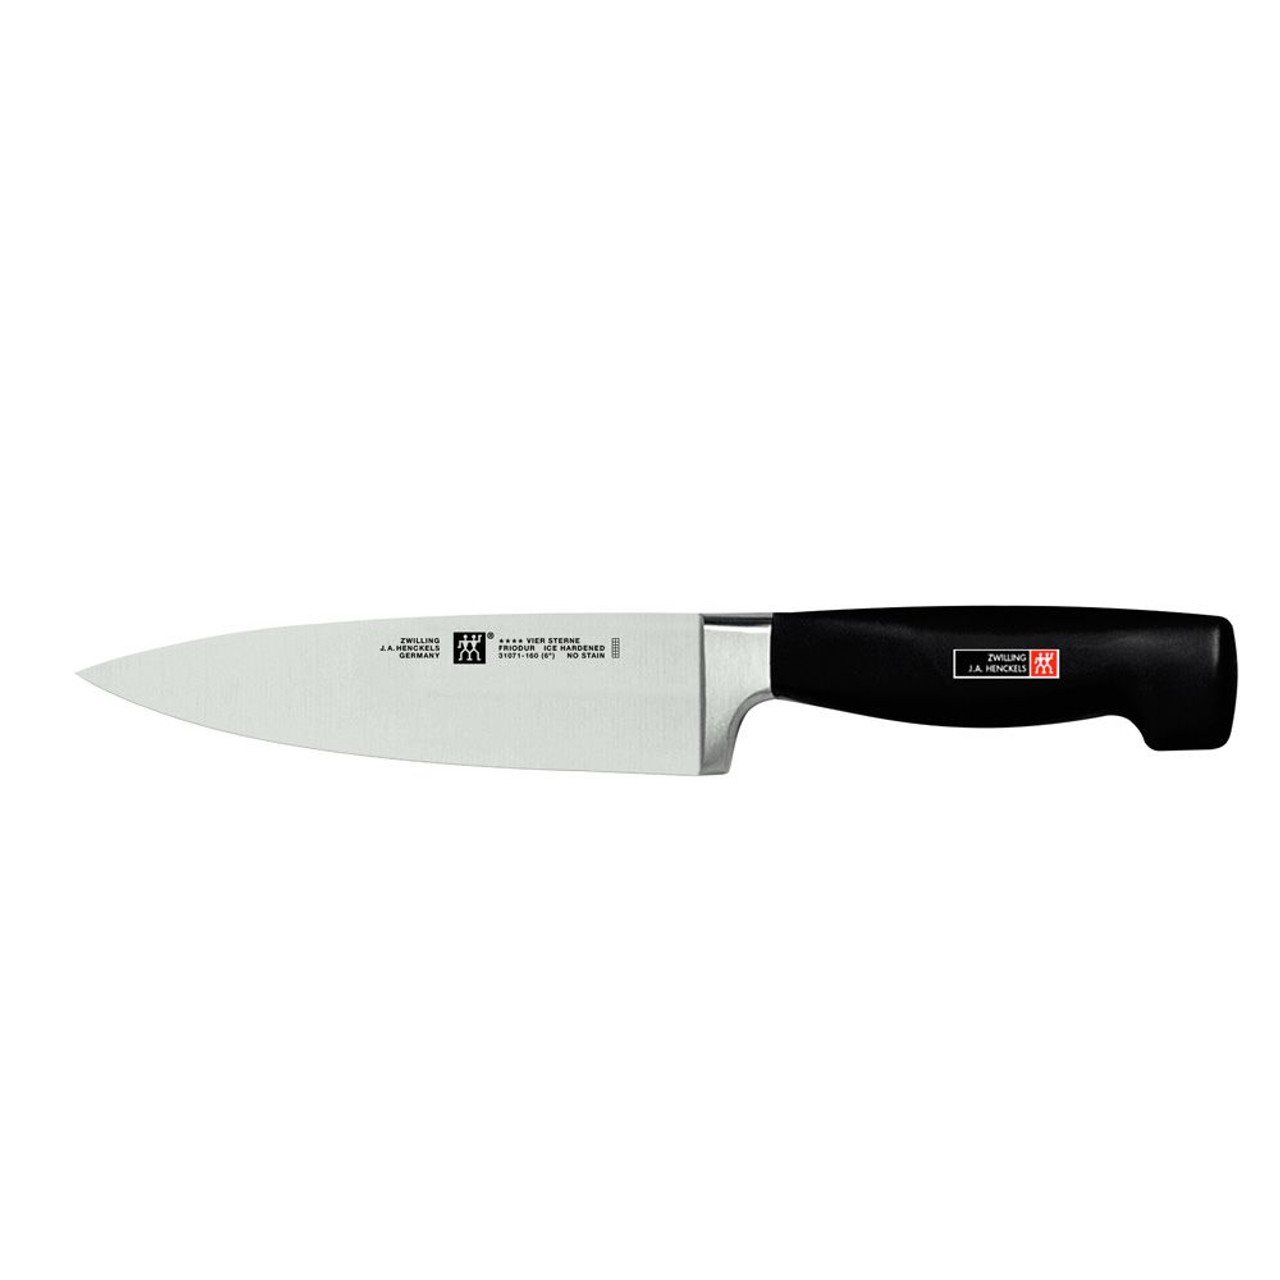 Zwilling J.A. Henckels Four Star 6 Chef's Knife